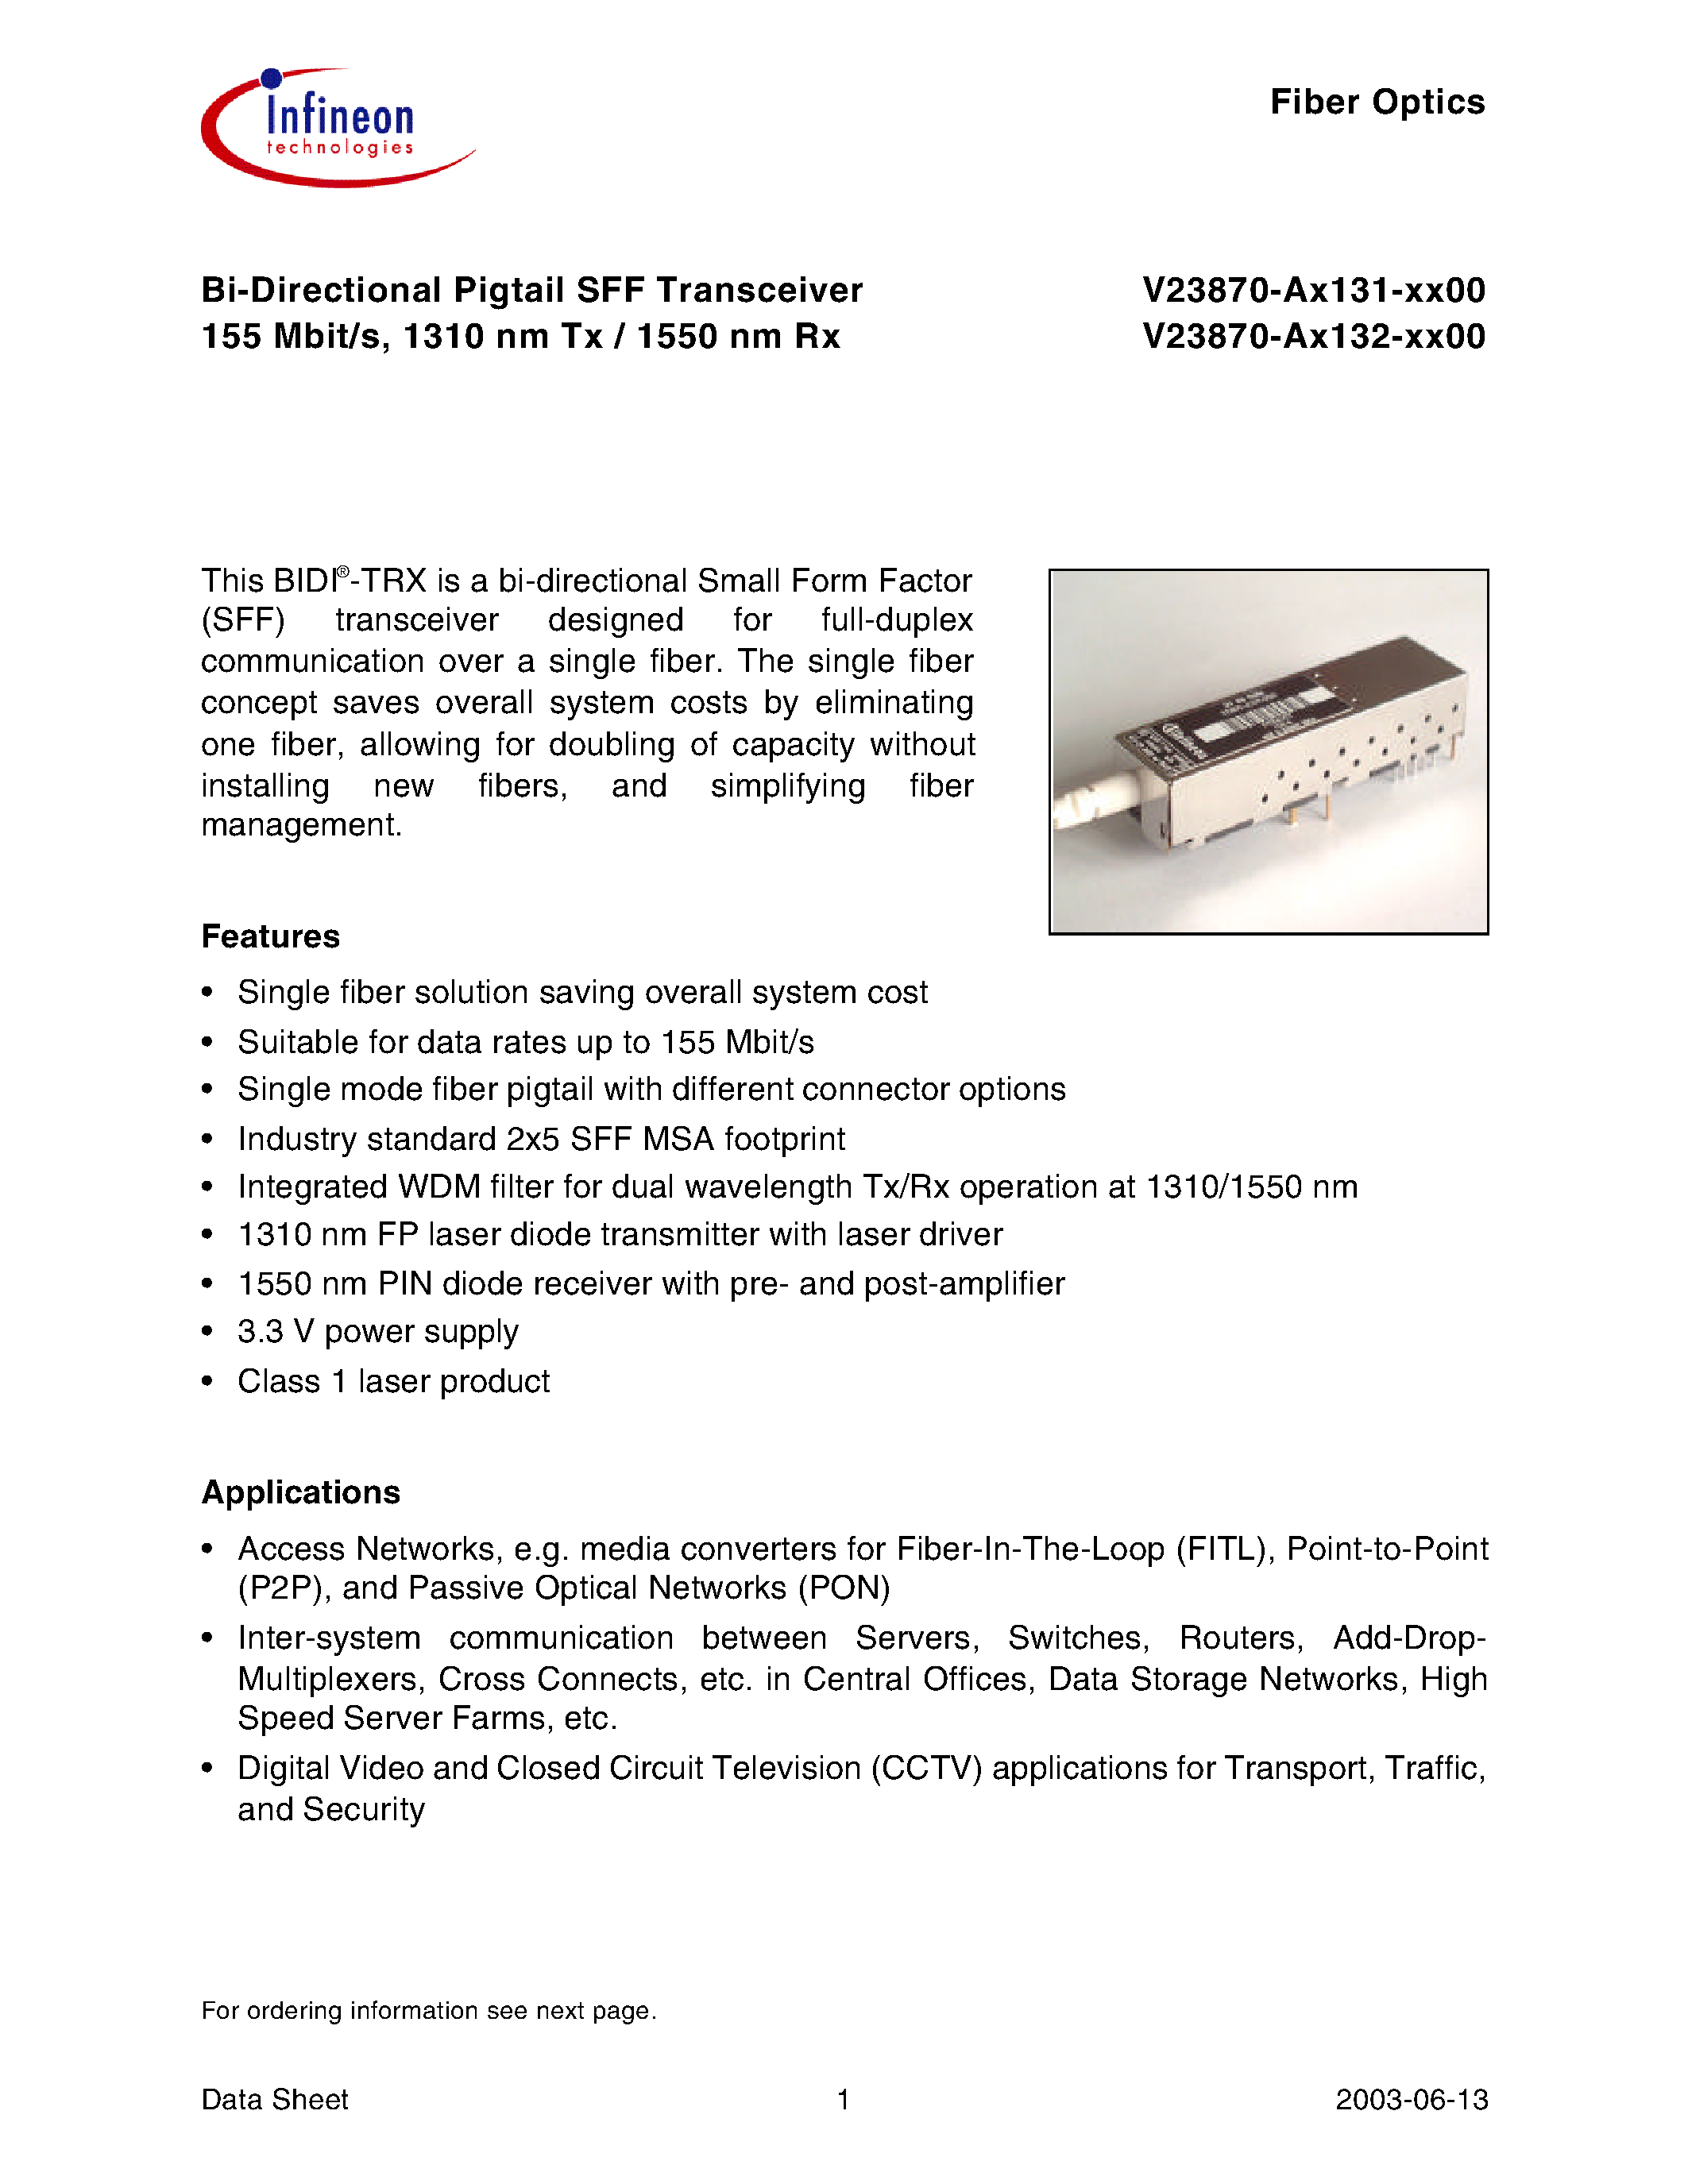 Datasheet V23870-A3132-H200 - Bi-Directional Pigtail SFF Transceiver 155 Mbit/s/ 1310 nm Tx / 1550 nm Rx page 1